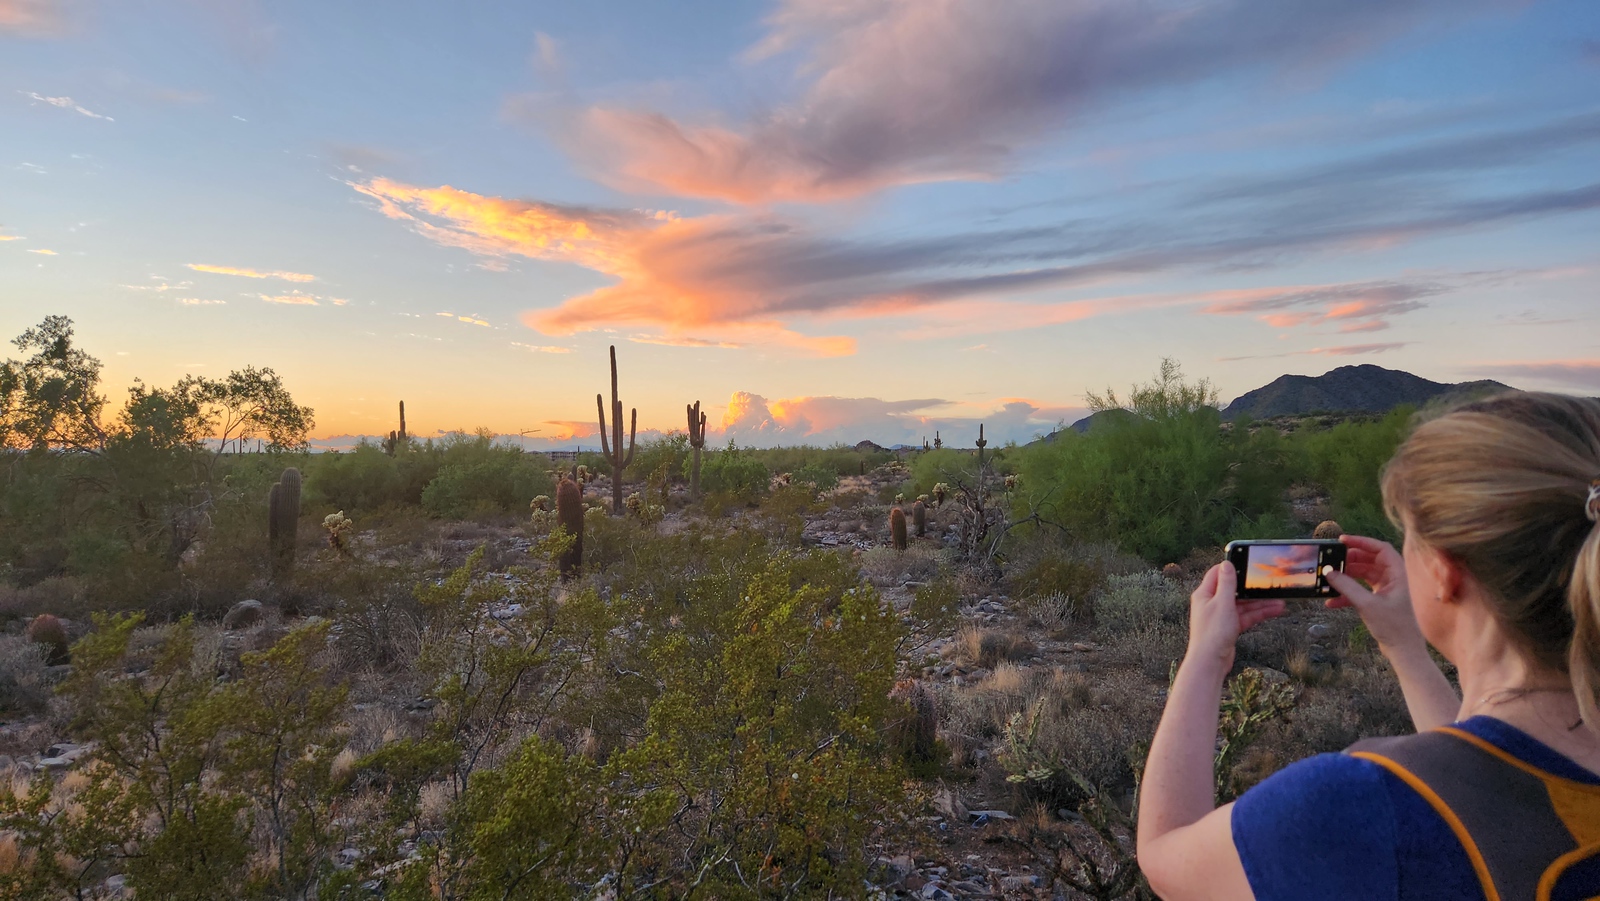 A female guest takes a picture of another memorable Arizona horizon during one of the Phoenix hiking tours from the Wild Bunch Desert Guides.